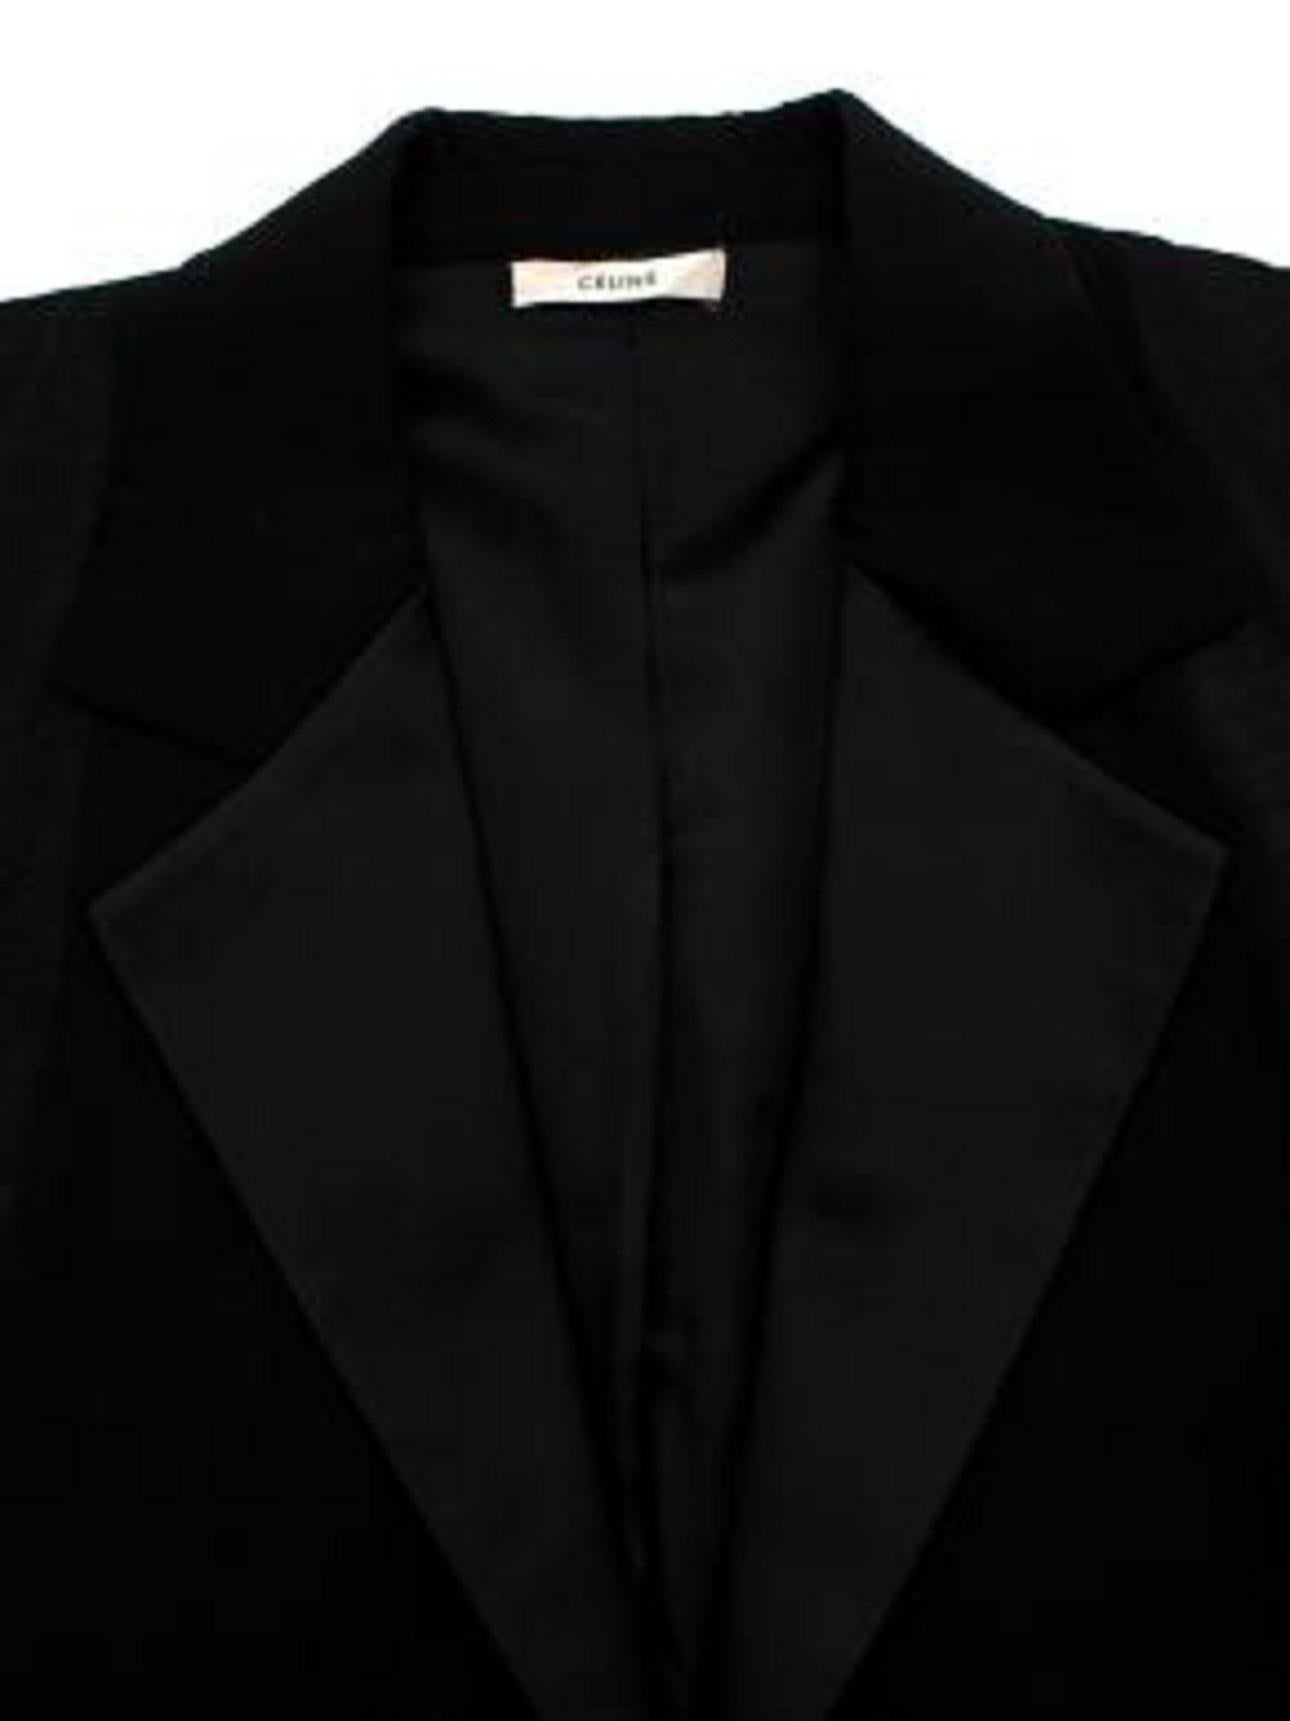 Celine Black Satin Double Breasted Coat In Good Condition For Sale In London, GB